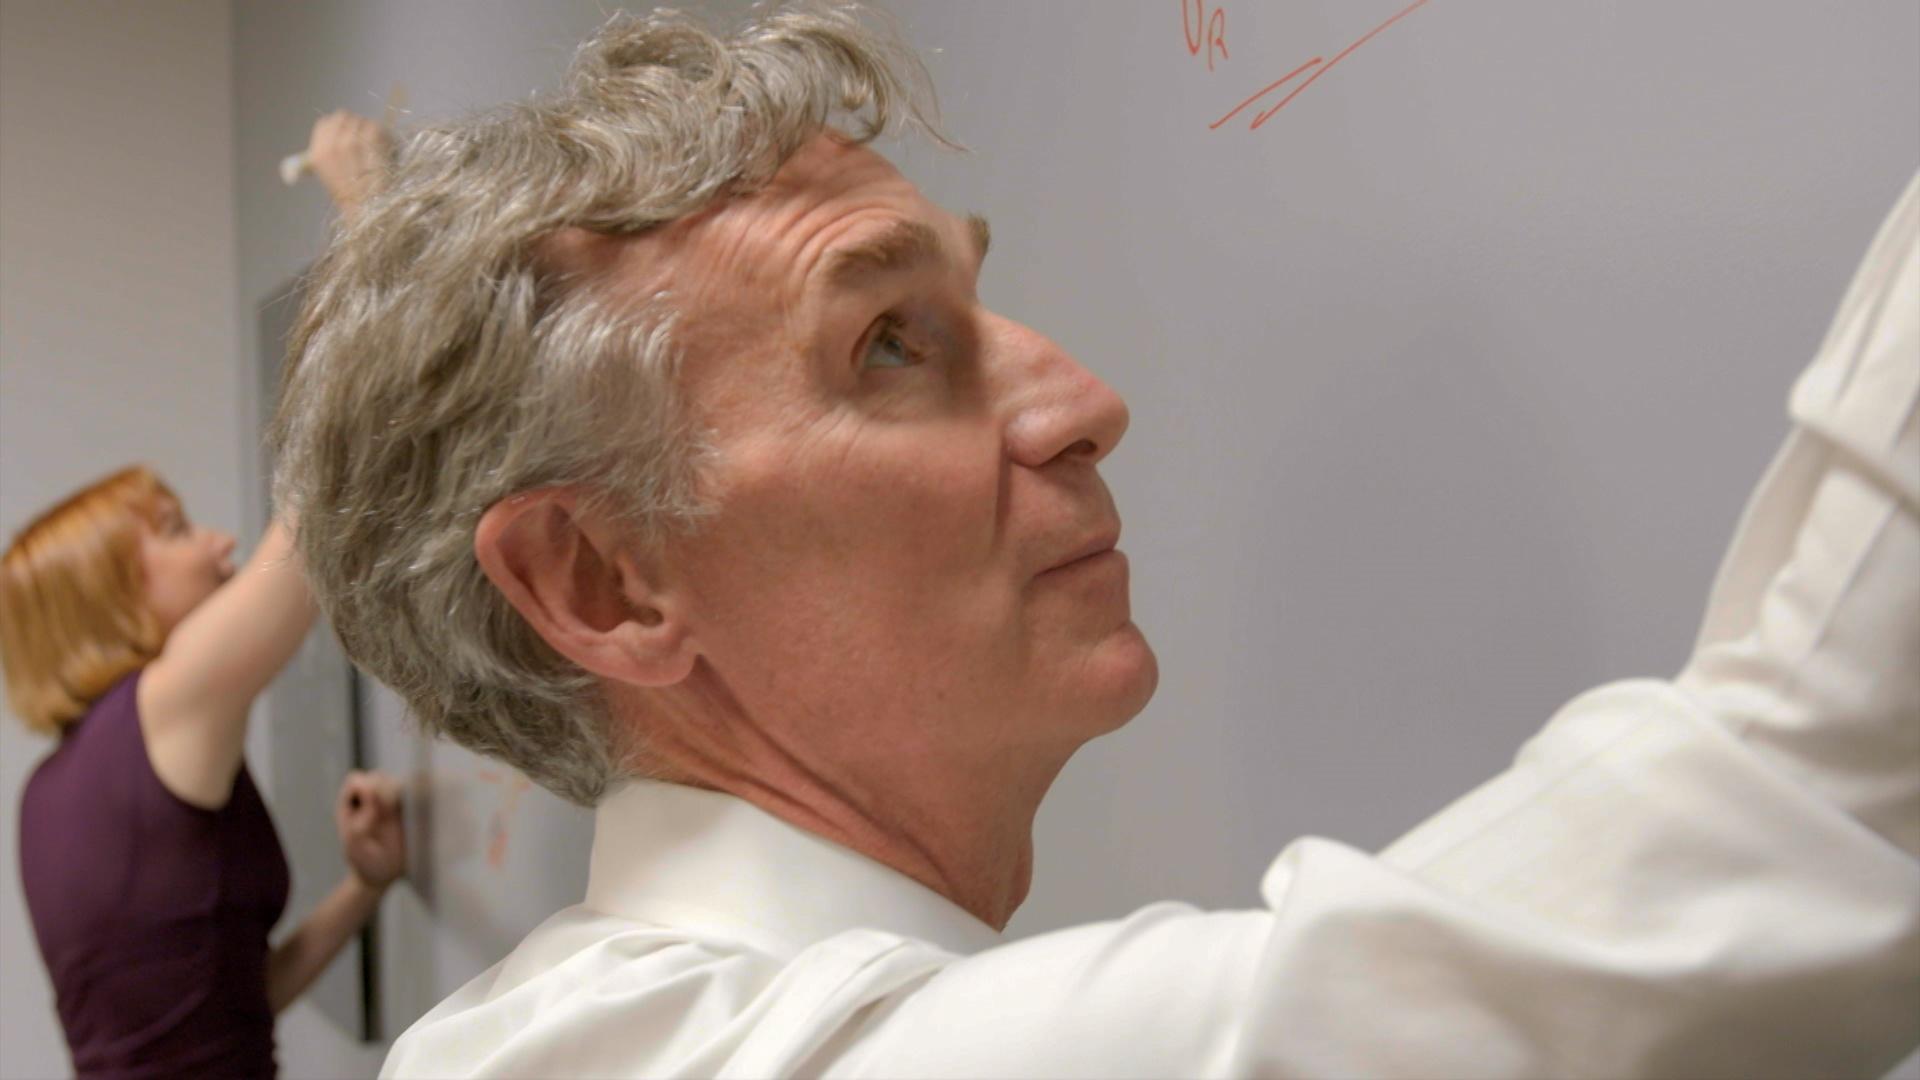 Bill Nye: Science Guy - The Wind from the Sun